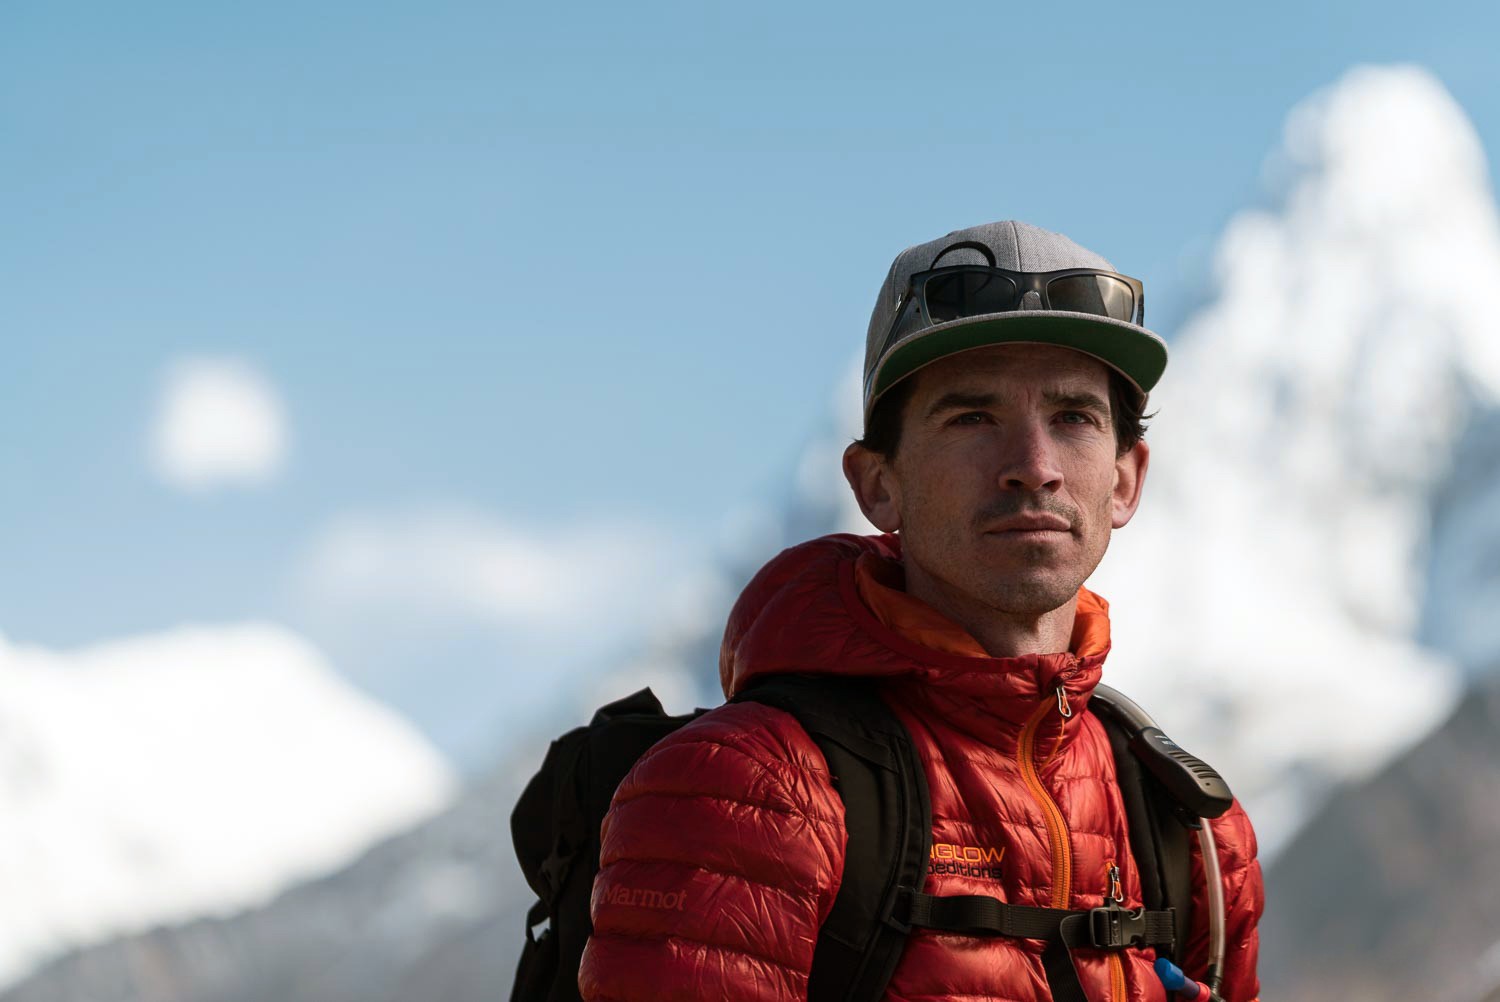 Adrian Ballinger reached Everest’s summit with no-oxygen in 2017, and believes Nepal's ban on disabled climbers and solo attempts will not be enforced. Photo: Alpenglow Expeditions